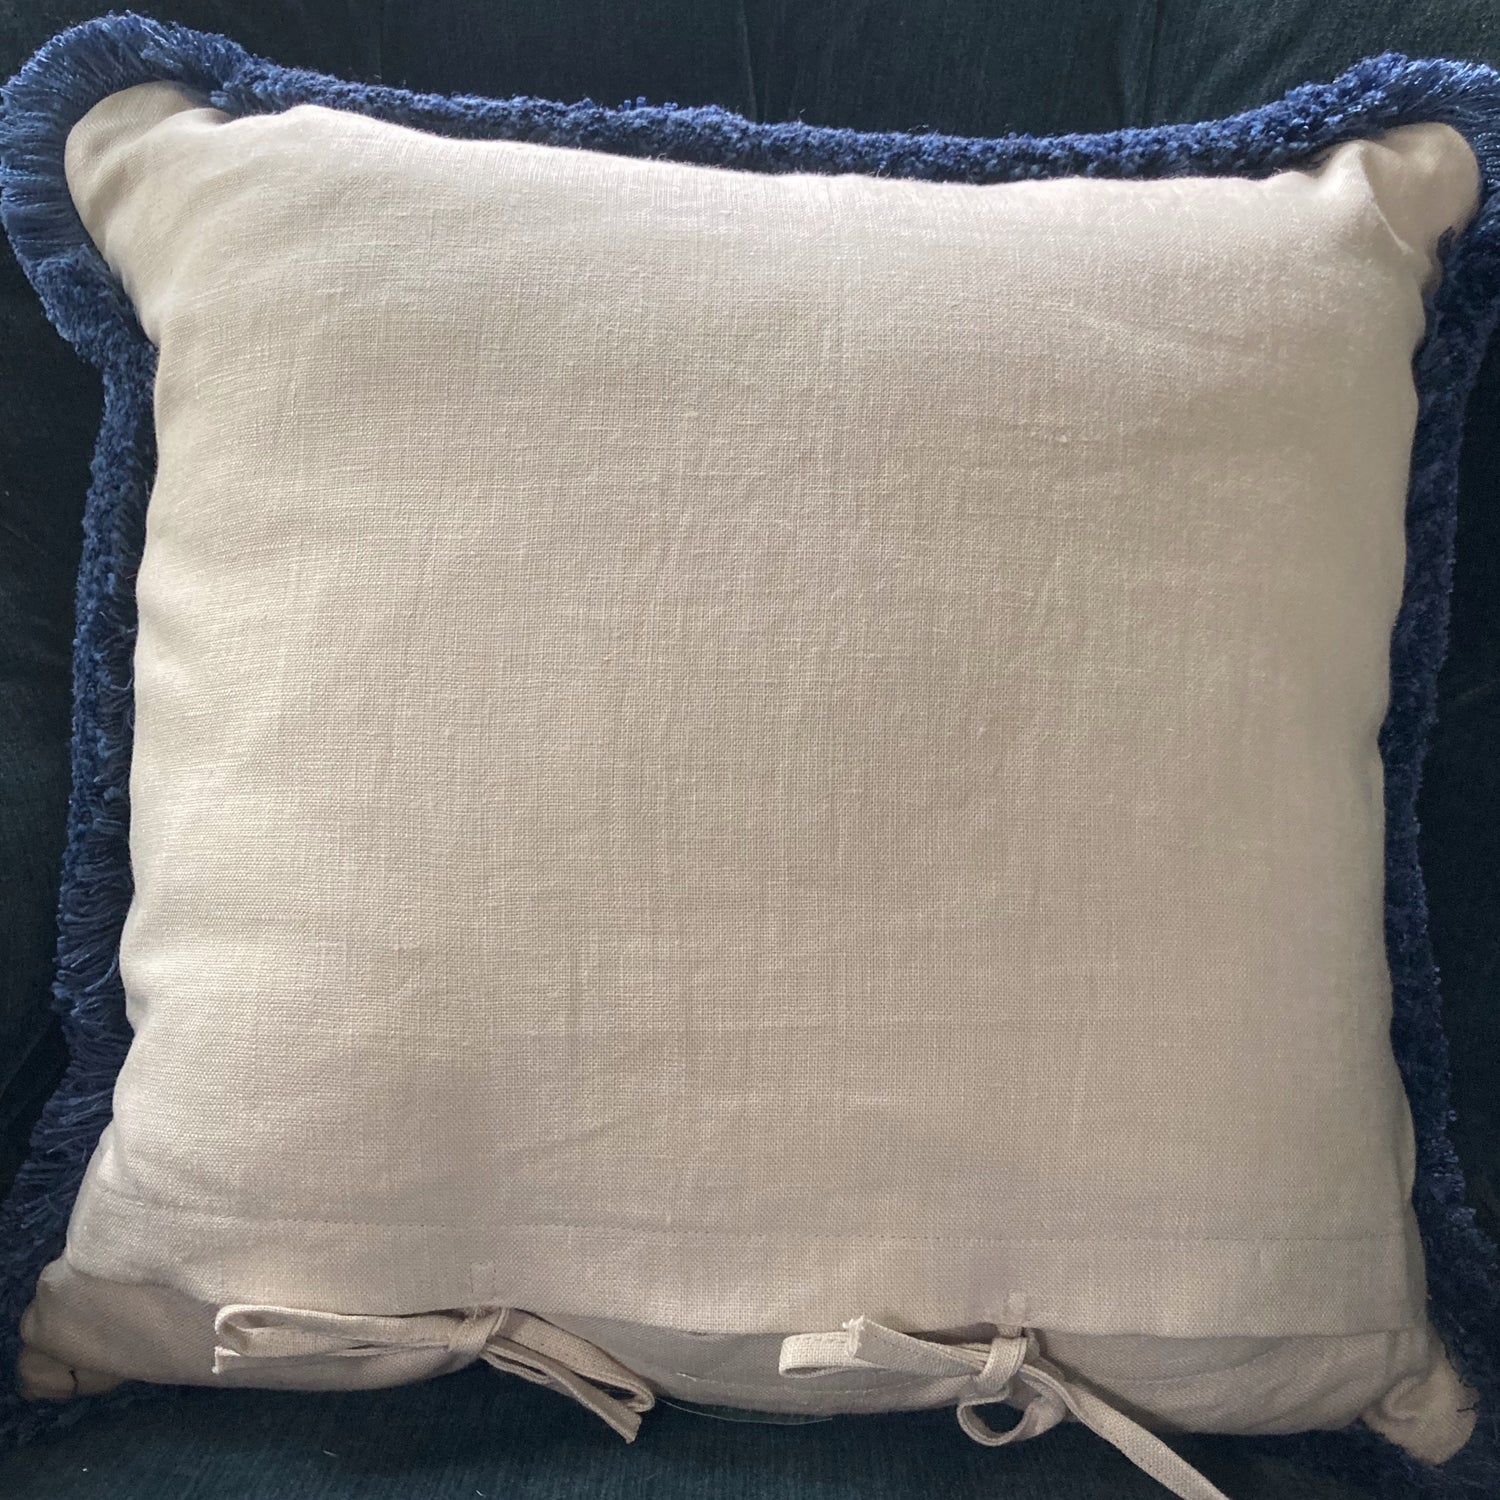 Amara Lapis Blue Medallions Linen 16 x 16 Square Designer Pillow Back with Ties with Down Feather Insert